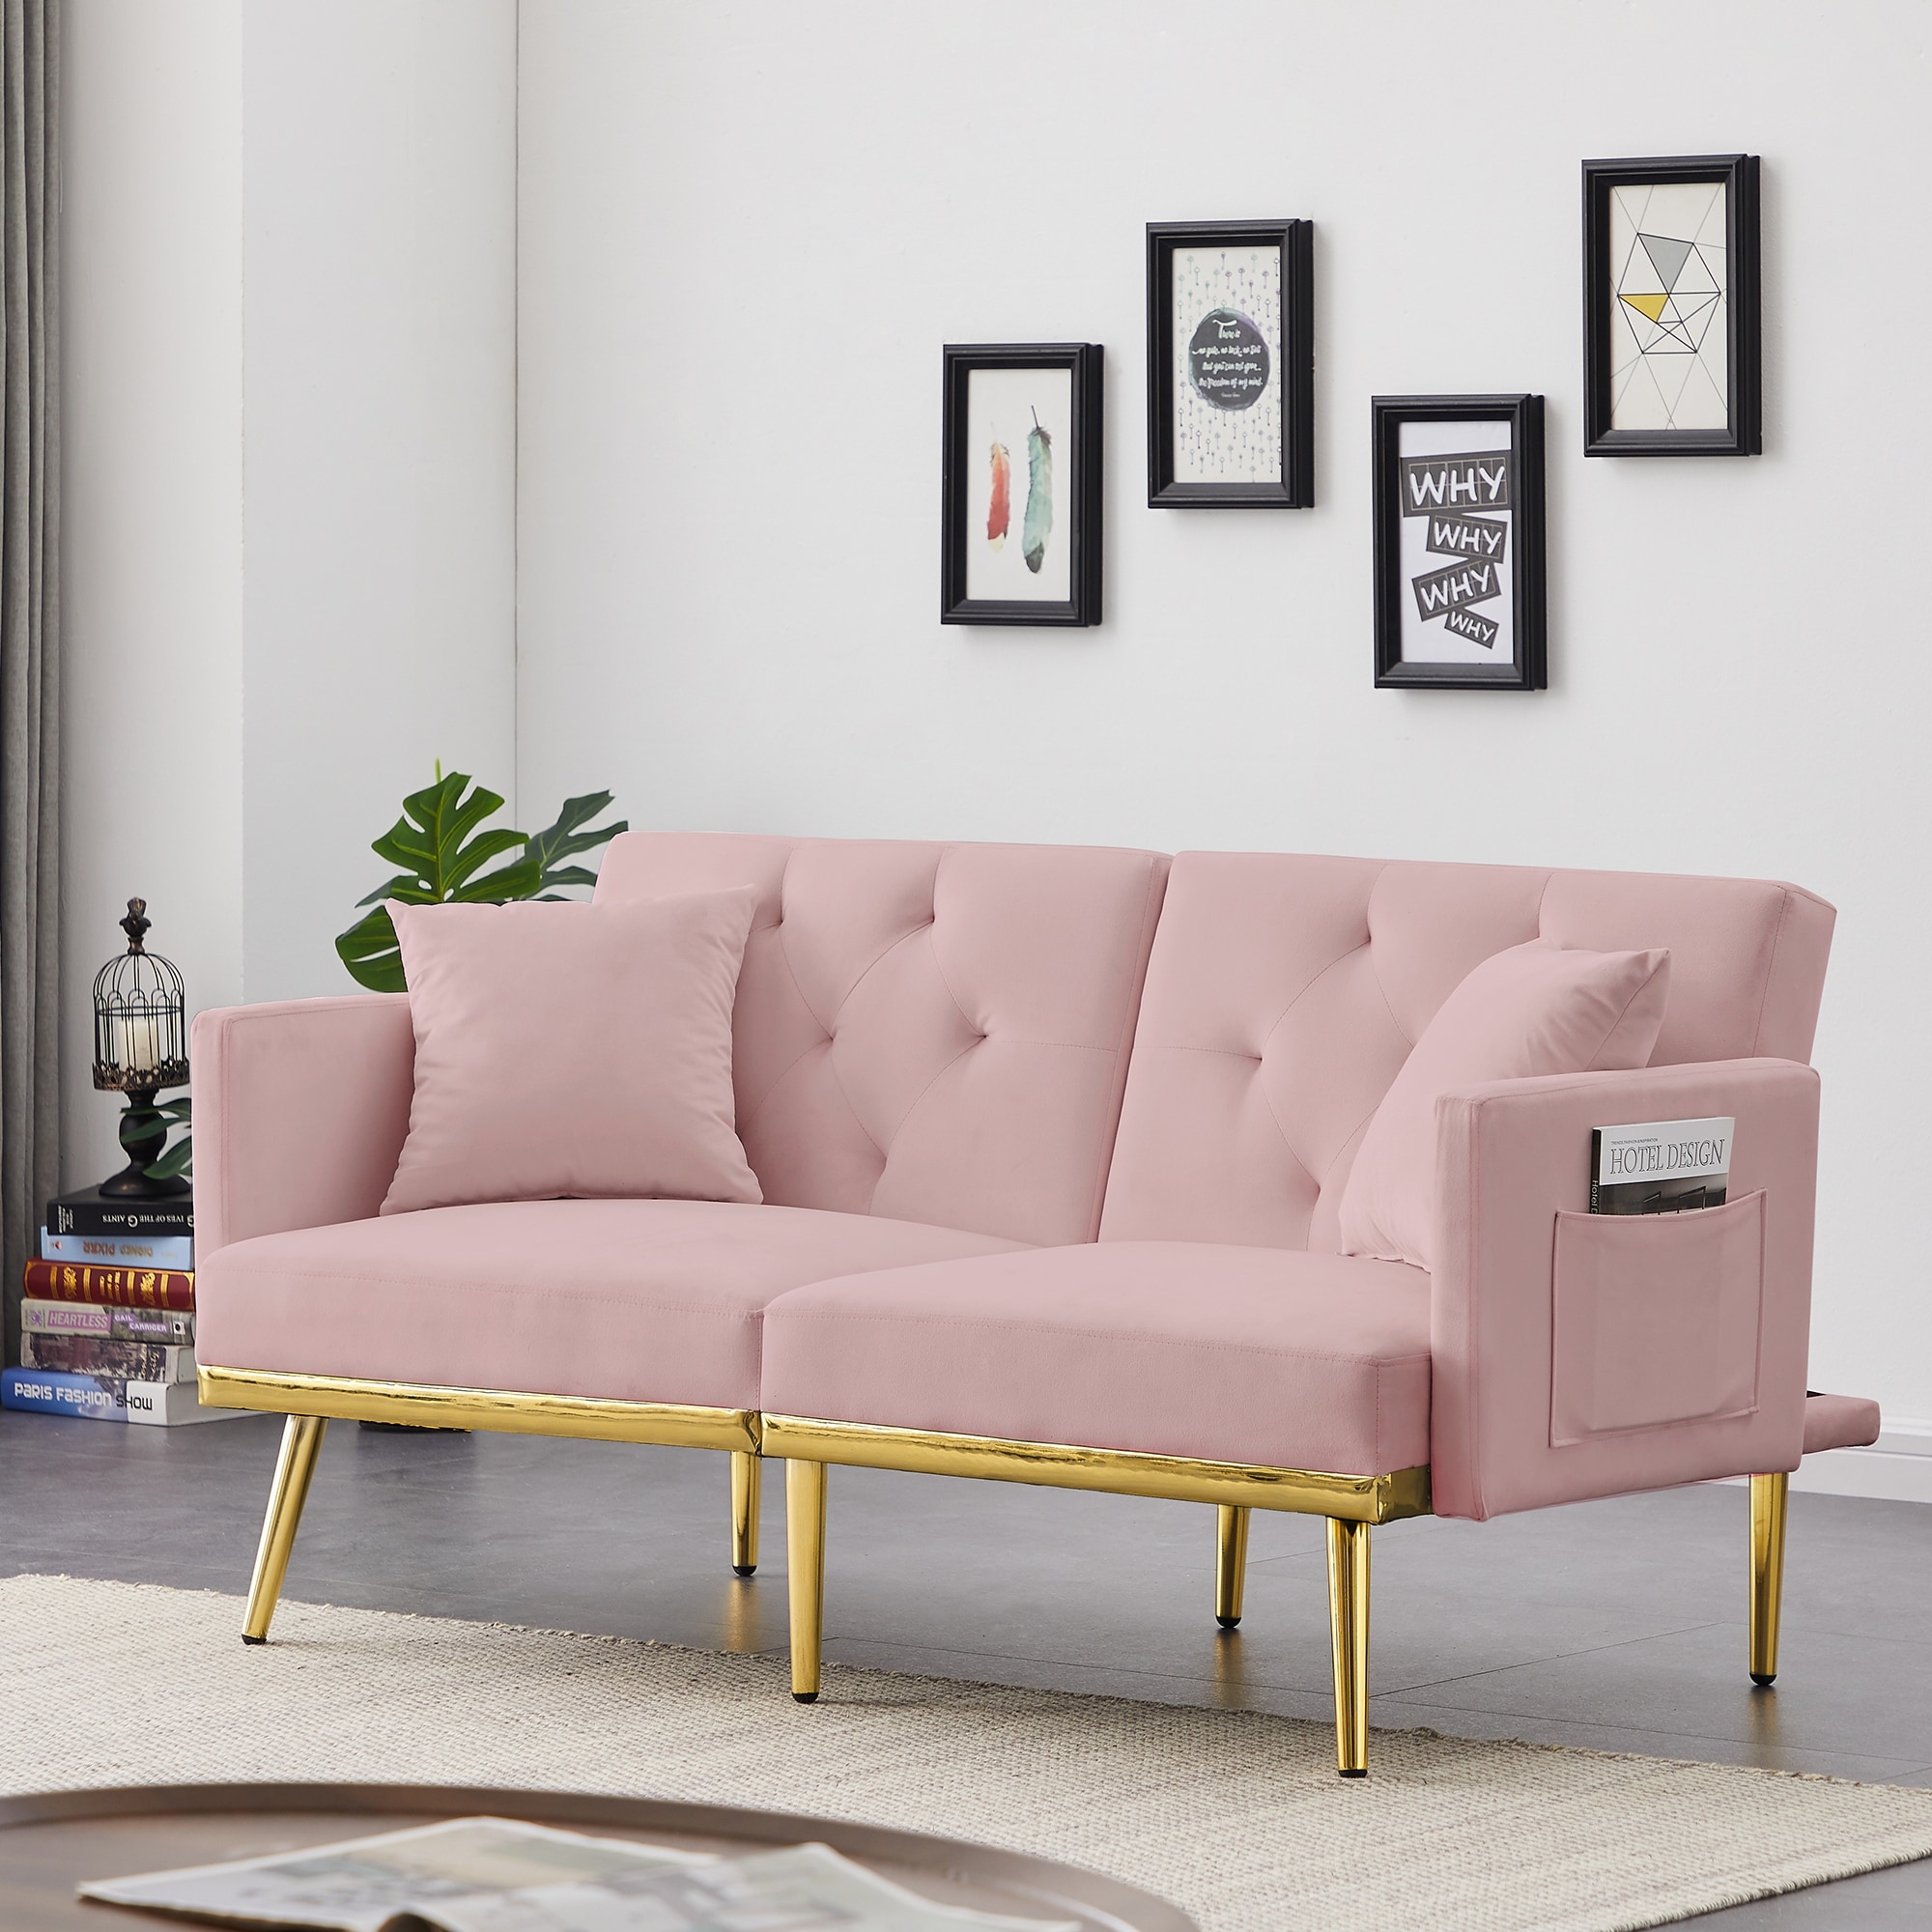 Sofa Bed Convertible Lounge Couch with Armrests - Bed Bath & Beyond - 38246733